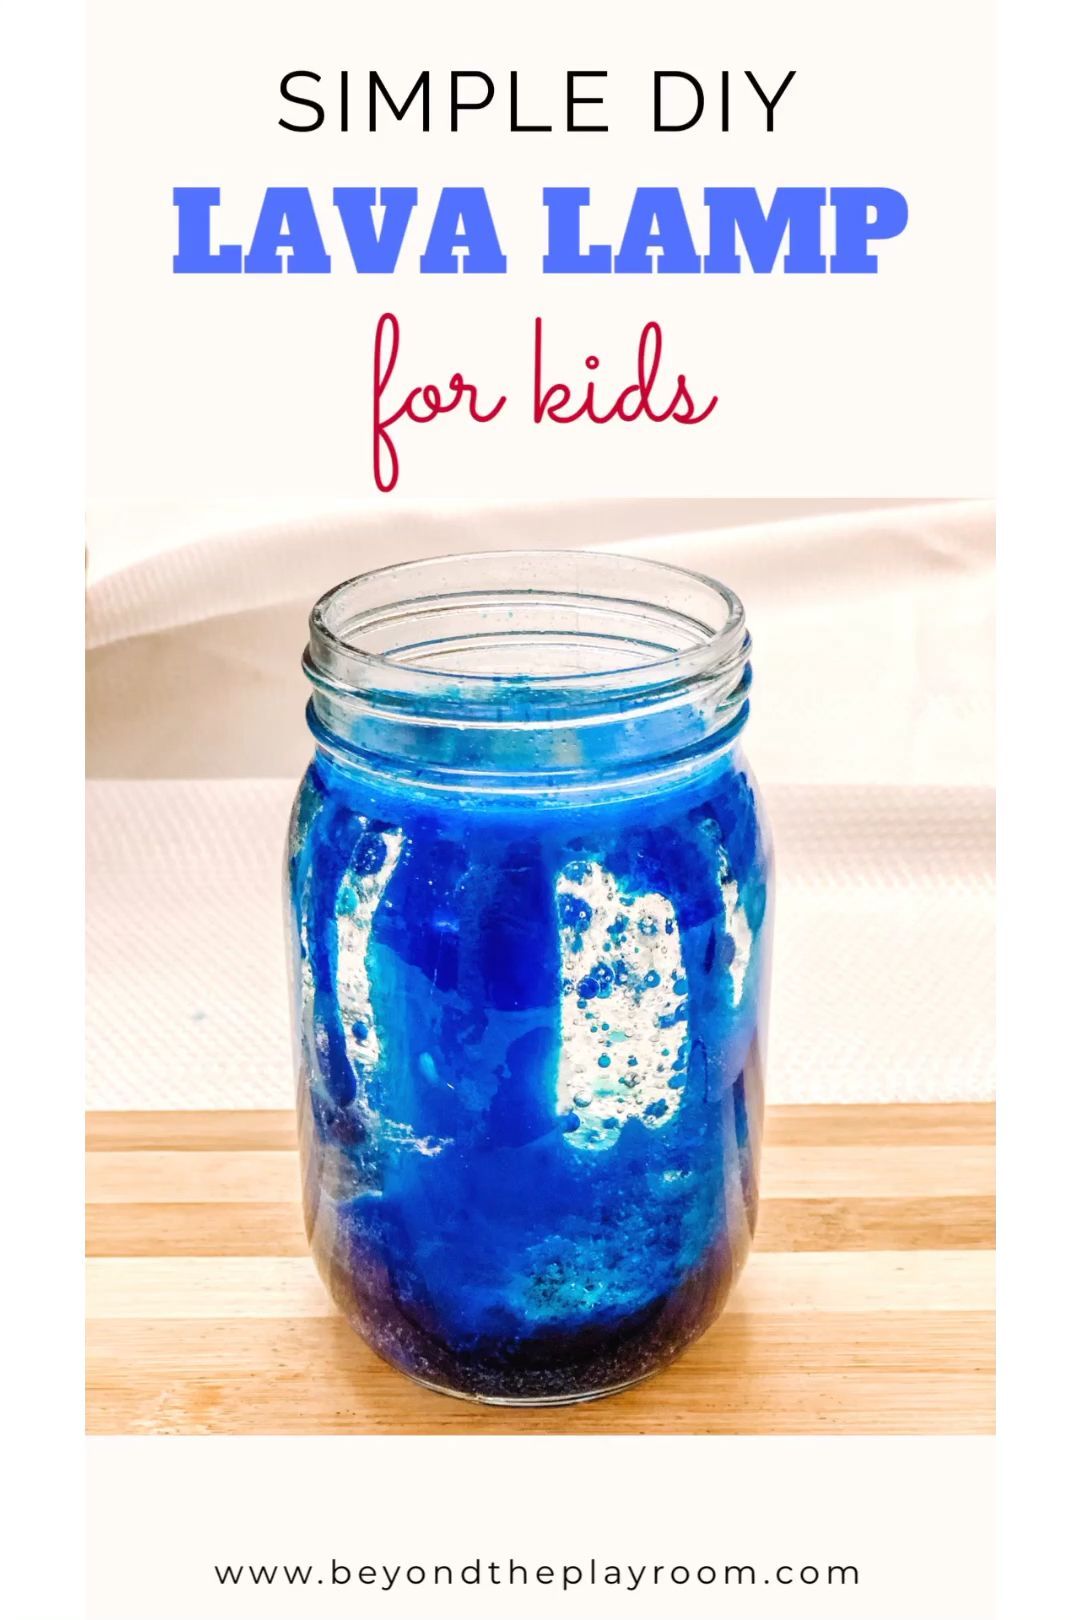 DIY Lava Lamp for Kids -   19 diy projects for kids boys fun crafts ideas